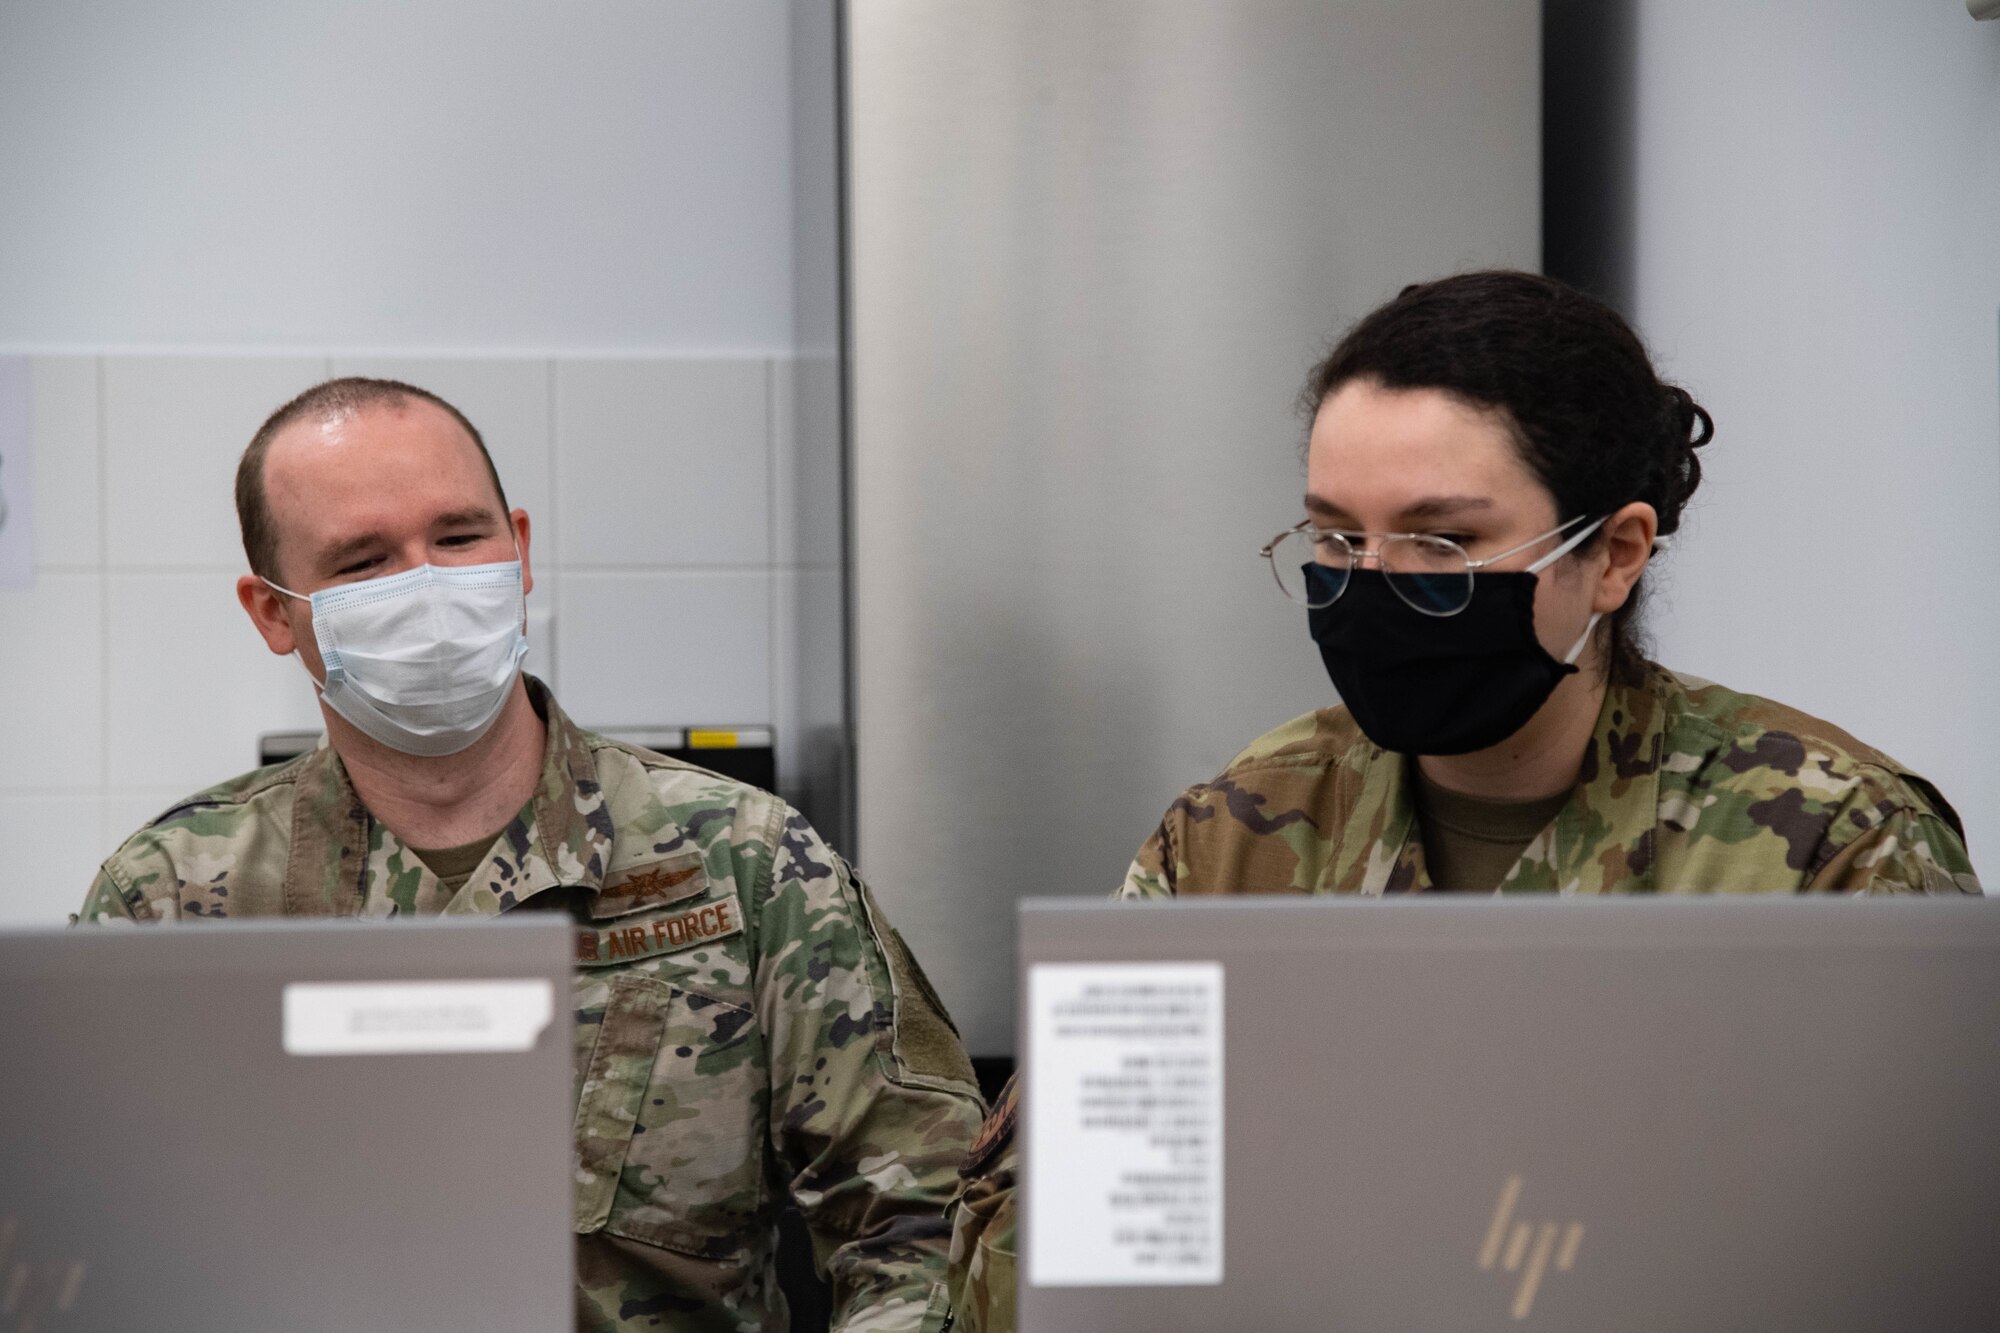 U.S Air Force Capt. Michael Jacobs, deputy branch chief of future operations headquarters United States European Command, discusses with Staff Sgt. Janeace Stampul, 2d Communication Squadron Mission Defense Team technician, about the capabilities of their Mission Assurance Capabilities Kit at Morón Air Base, Spain, June 2, 2021. Mission Defense Teams safeguard data analytics ensuring   weapons systems are safe from adversaries. (U.S. Air Force photo by 2nd Lt Aileen Lauer)